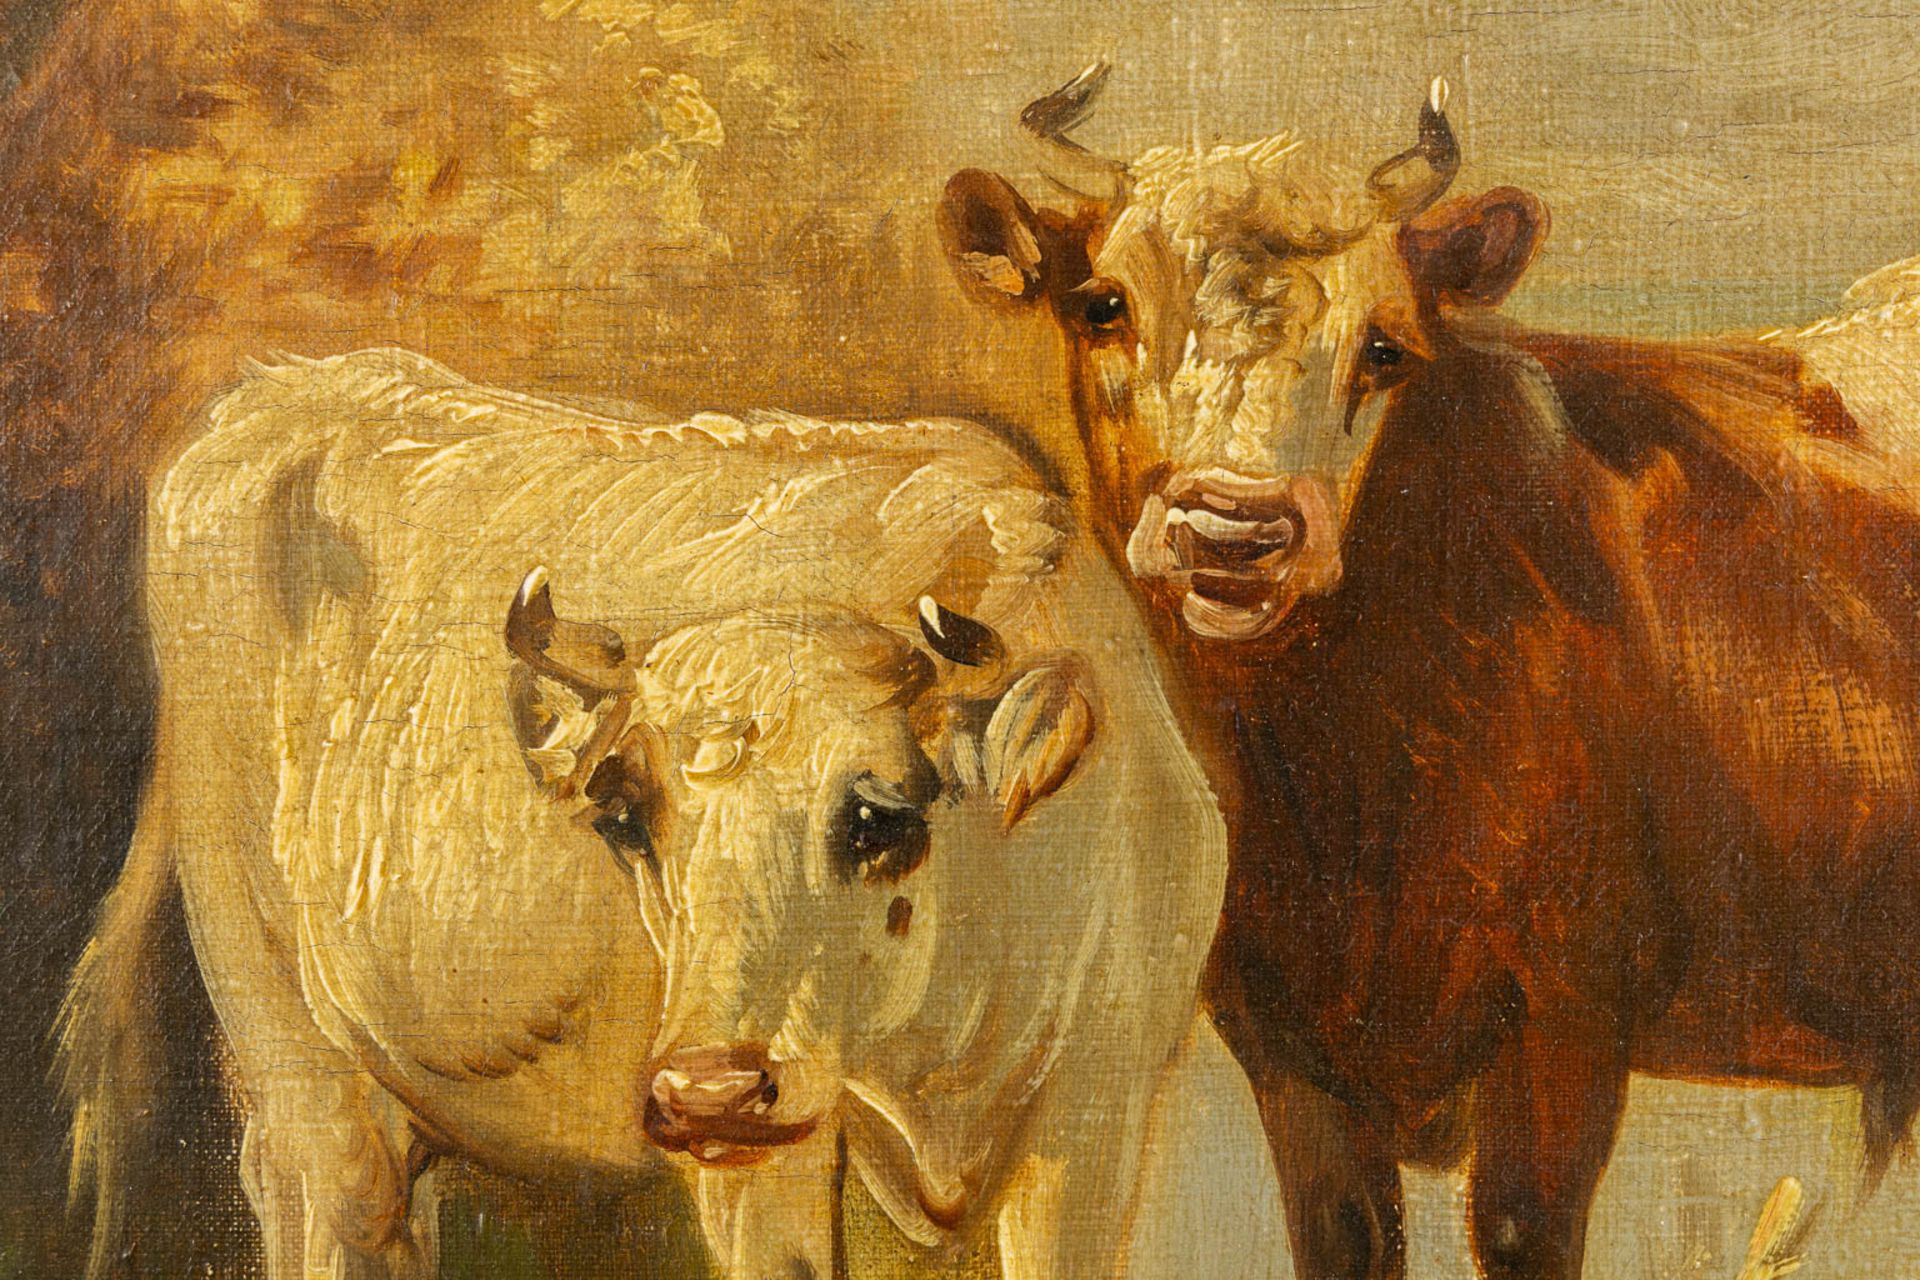 Paul SCHOUTEN (1860-1922) 'Cows in a pond' oil on canvas. (W:62 x H:45 cm) - Image 4 of 10